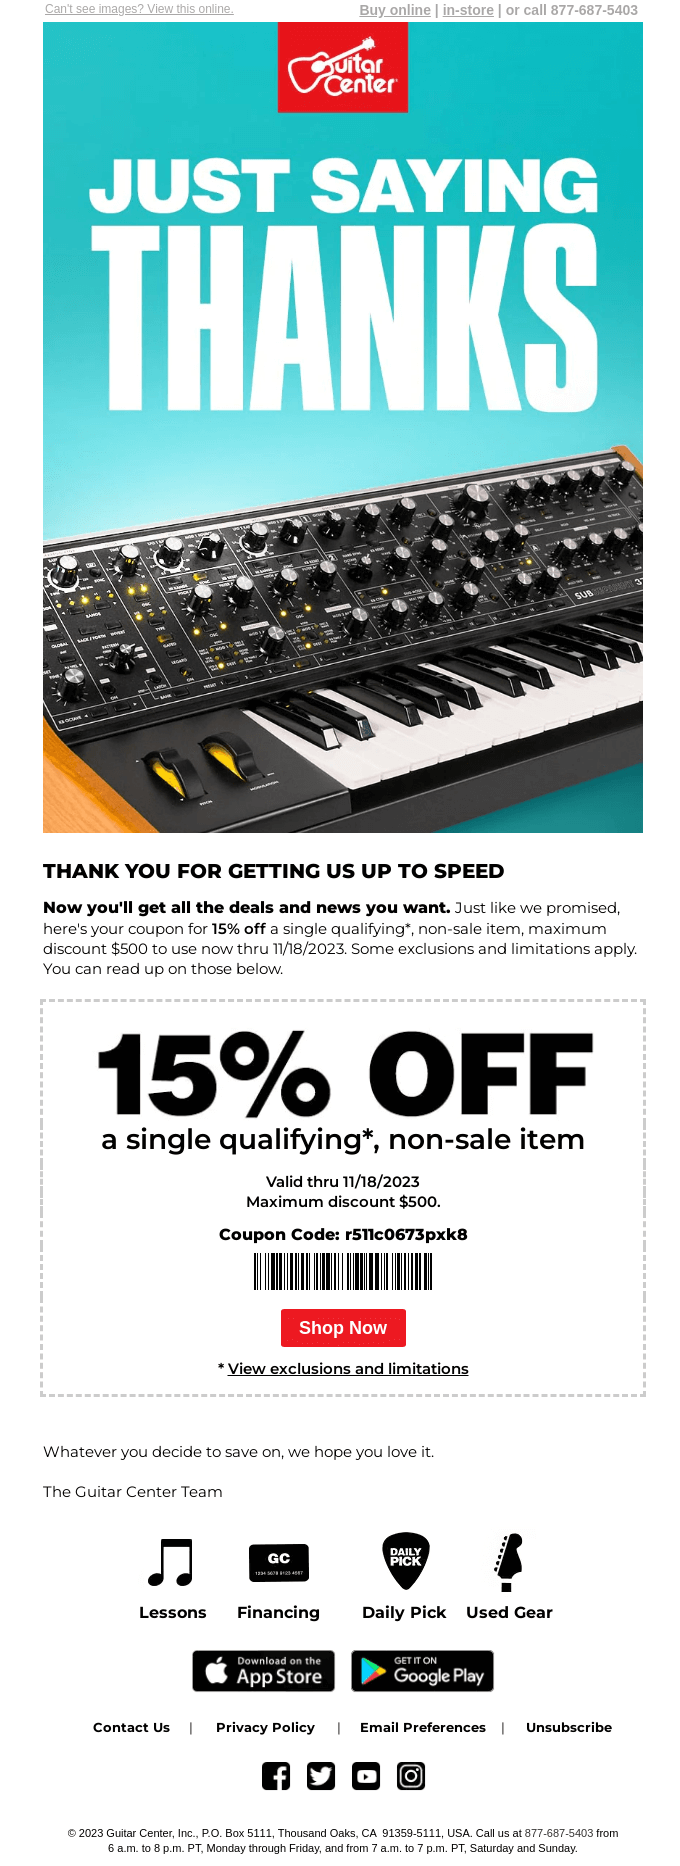 Your 15% off, as promised